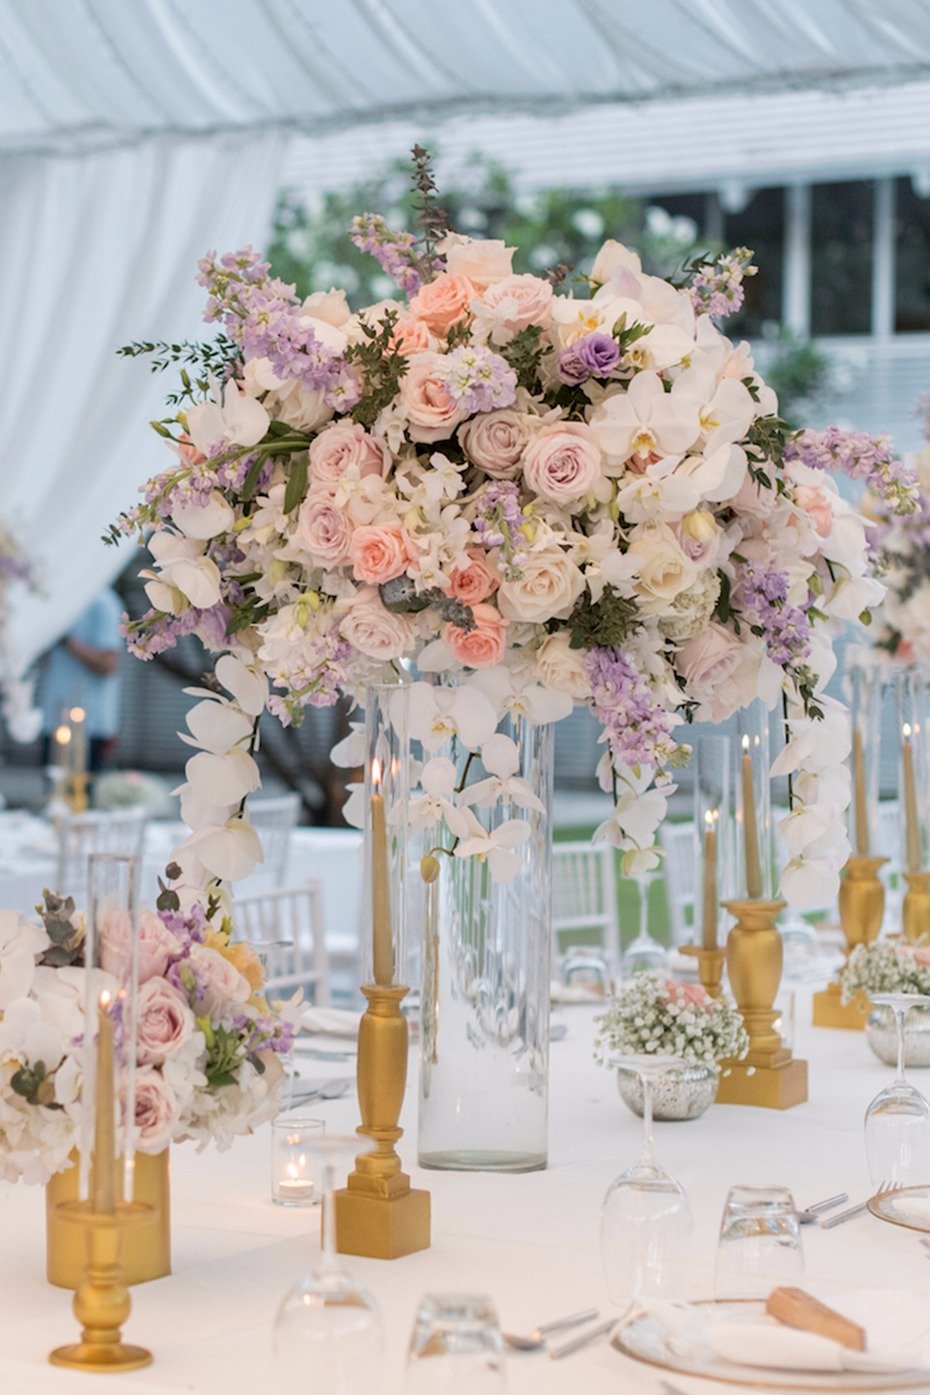 Tall centerpieces in clear vases